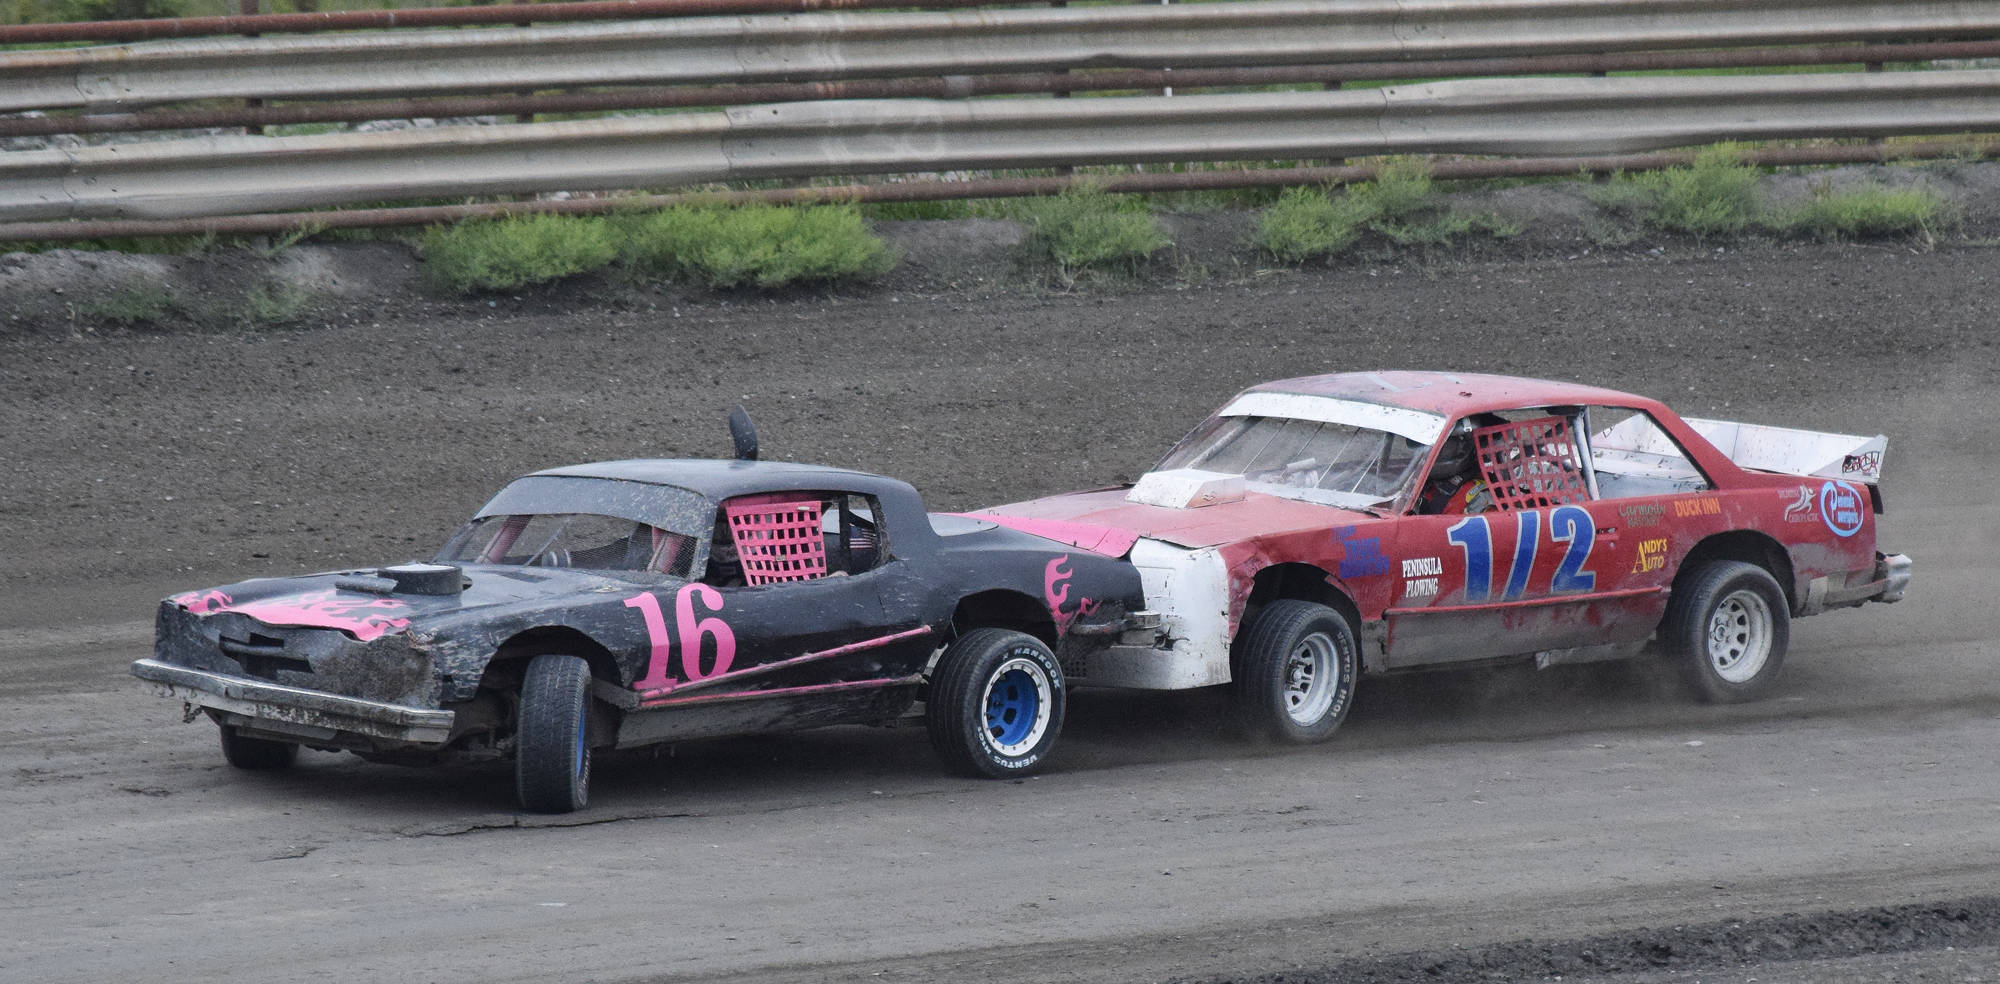 Sean Endsley (right) puts the bumper to Gracie Bass (16) in an A-Stock heat race Saturday night at Twin City Raceway in Kenai. (Photo by Joey Klecka/Peninsula Clarion)